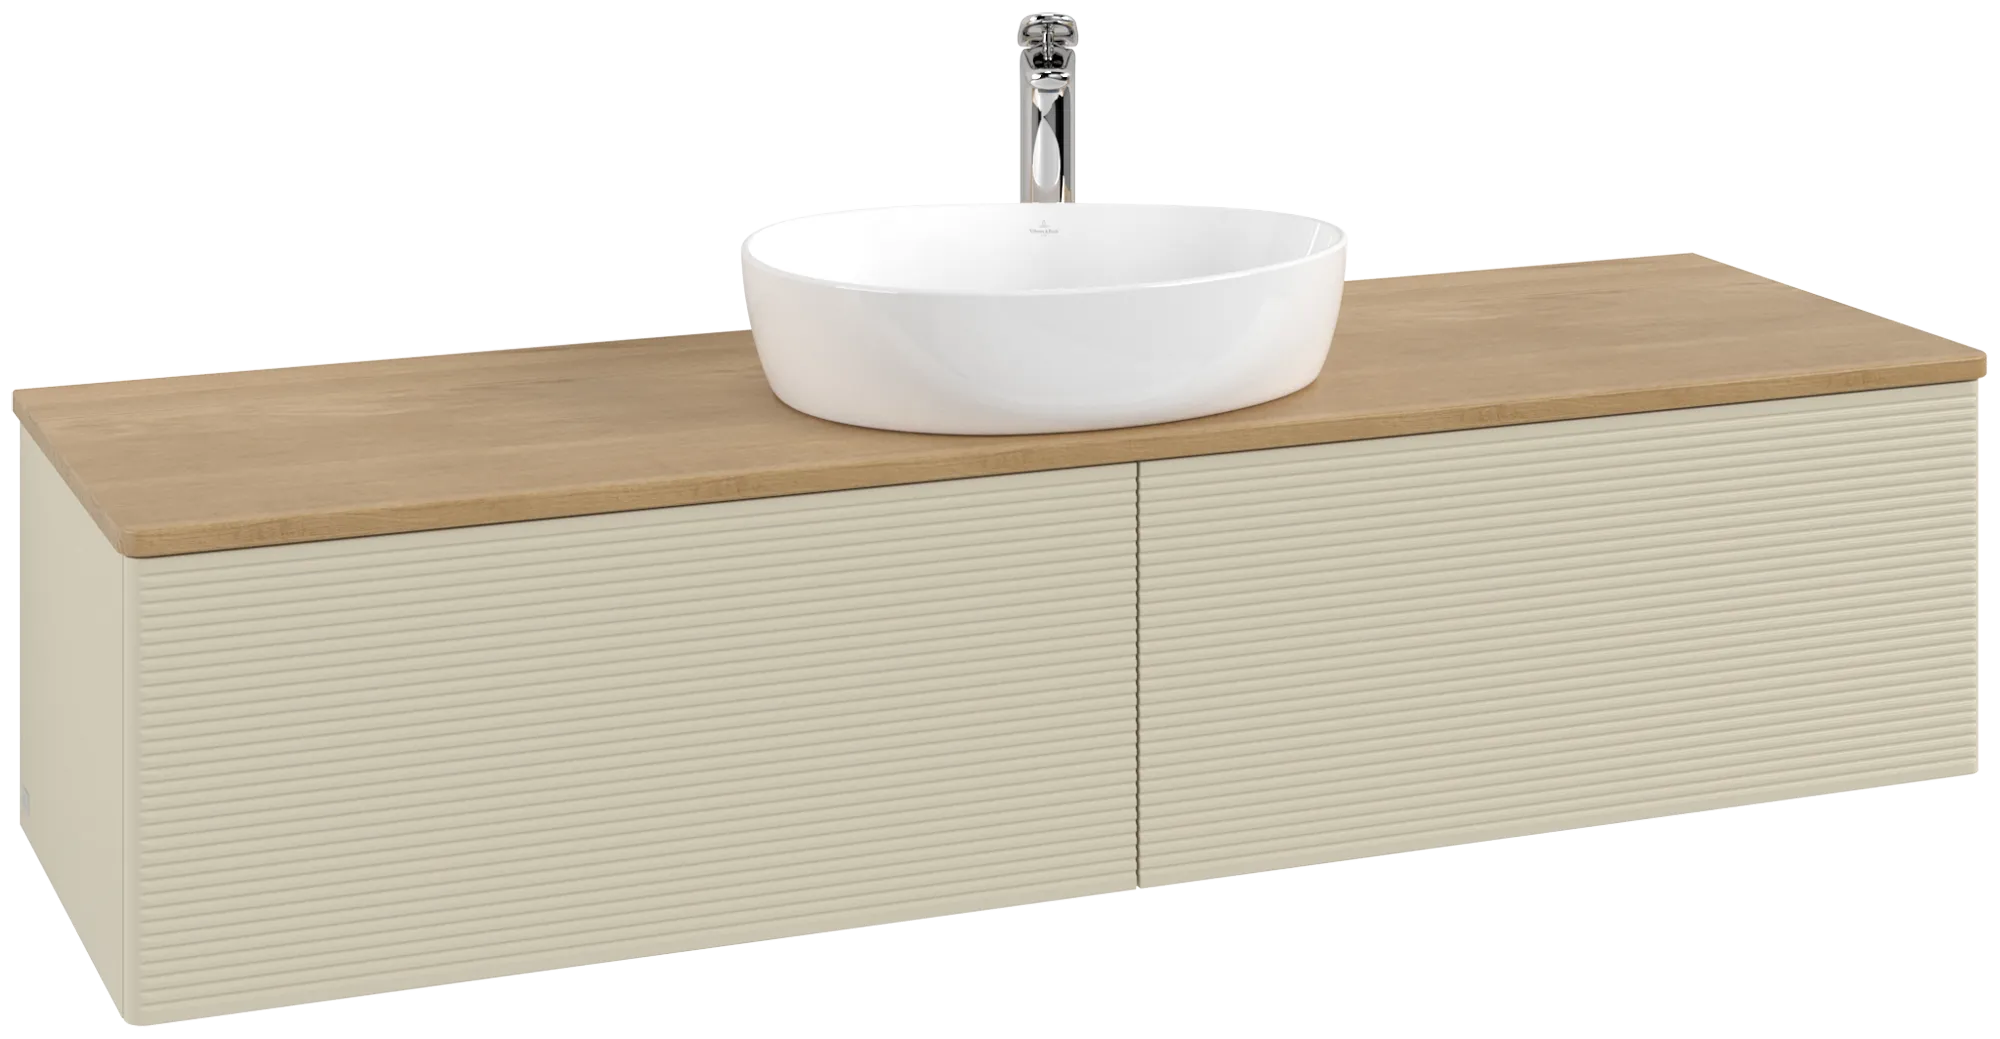 VILLEROY BOCH Antao Vanity unit, with lighting, 2 pull-out compartments, 1600 x 360 x 500 mm, Front with grain texture, Silk Grey Matt Lacquer / Honey Oak #L36151HJ resmi